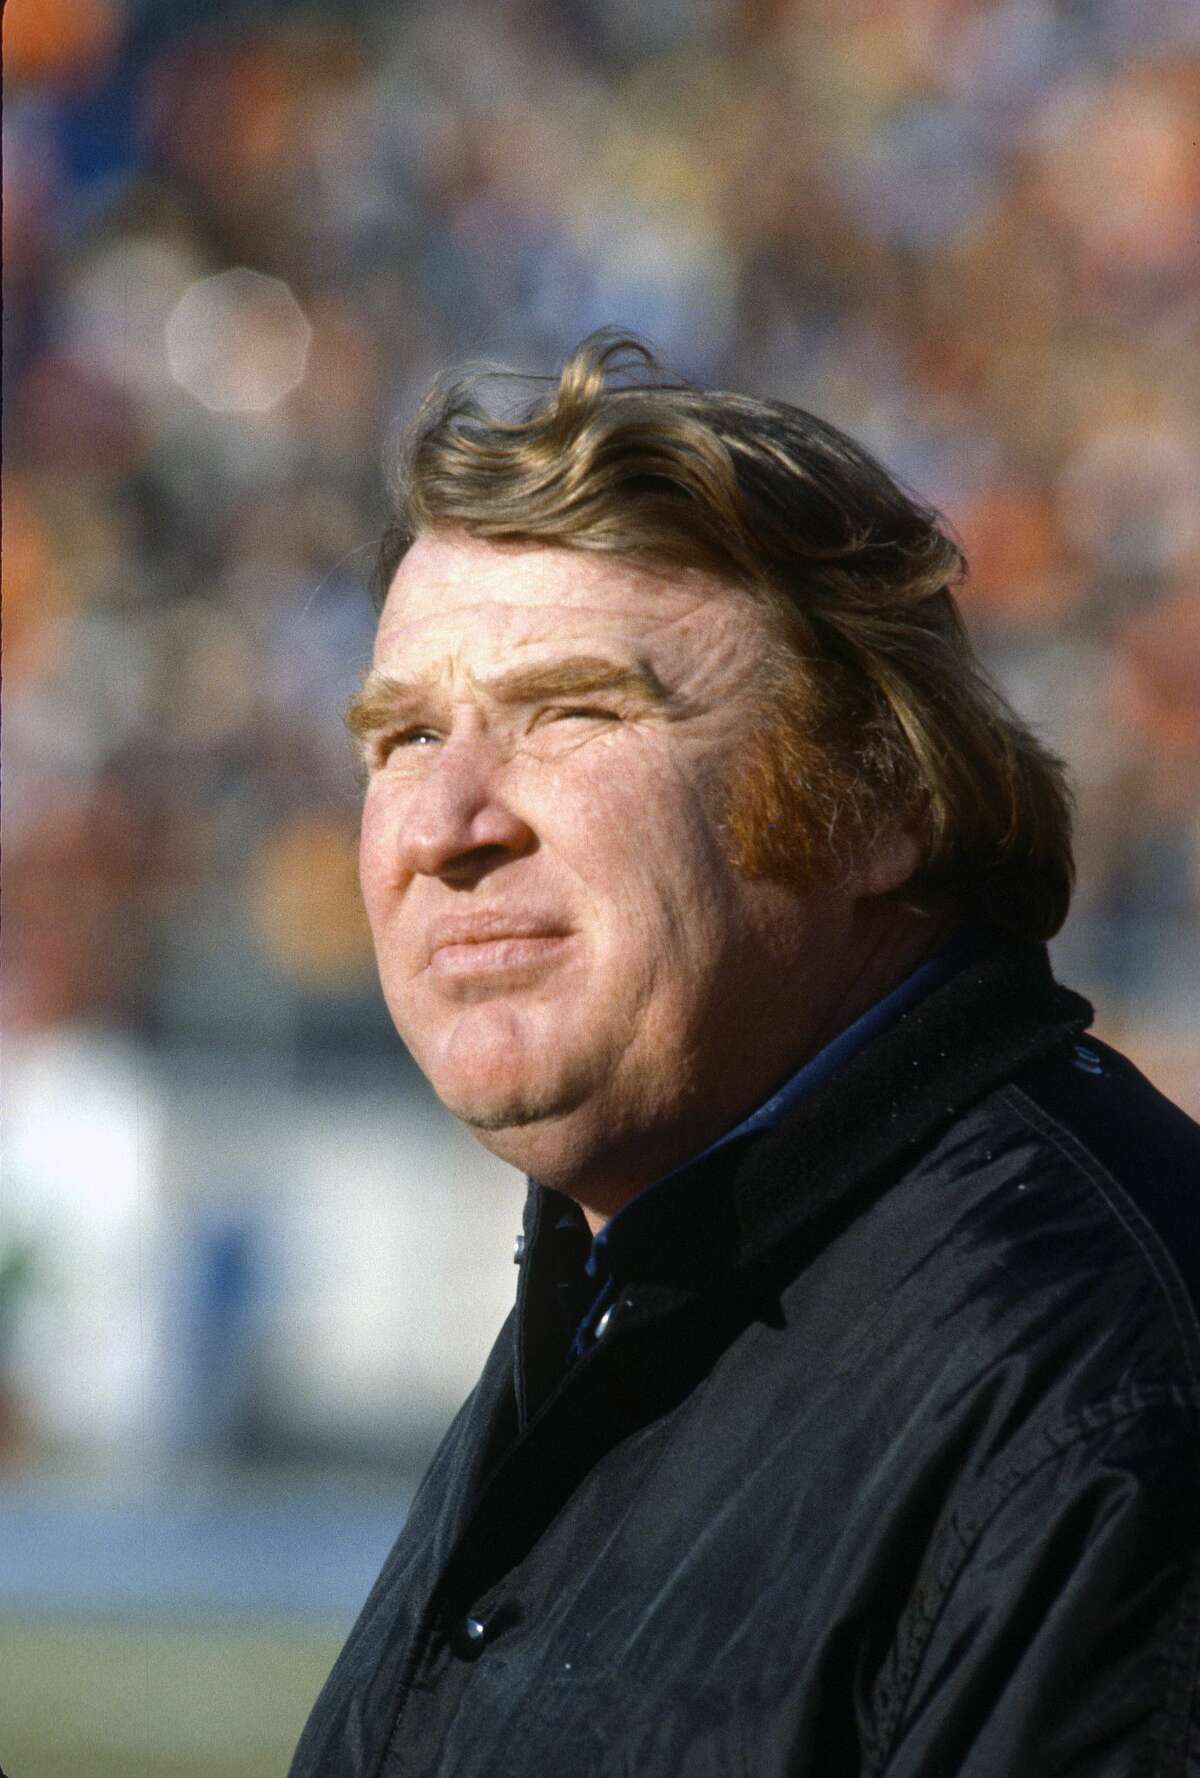 DENVER, CO - JANUARY 1: John Madden head coach of the Oakland Raiders looks on from the sidelines against the Denver Broncos during the AFC Championship Game on January 1, 1978 at Mile High Stadium in Denver, Colorado. Madden coached the Raiders from 1969-78. (Photo by Focus on Sport/Getty Images)